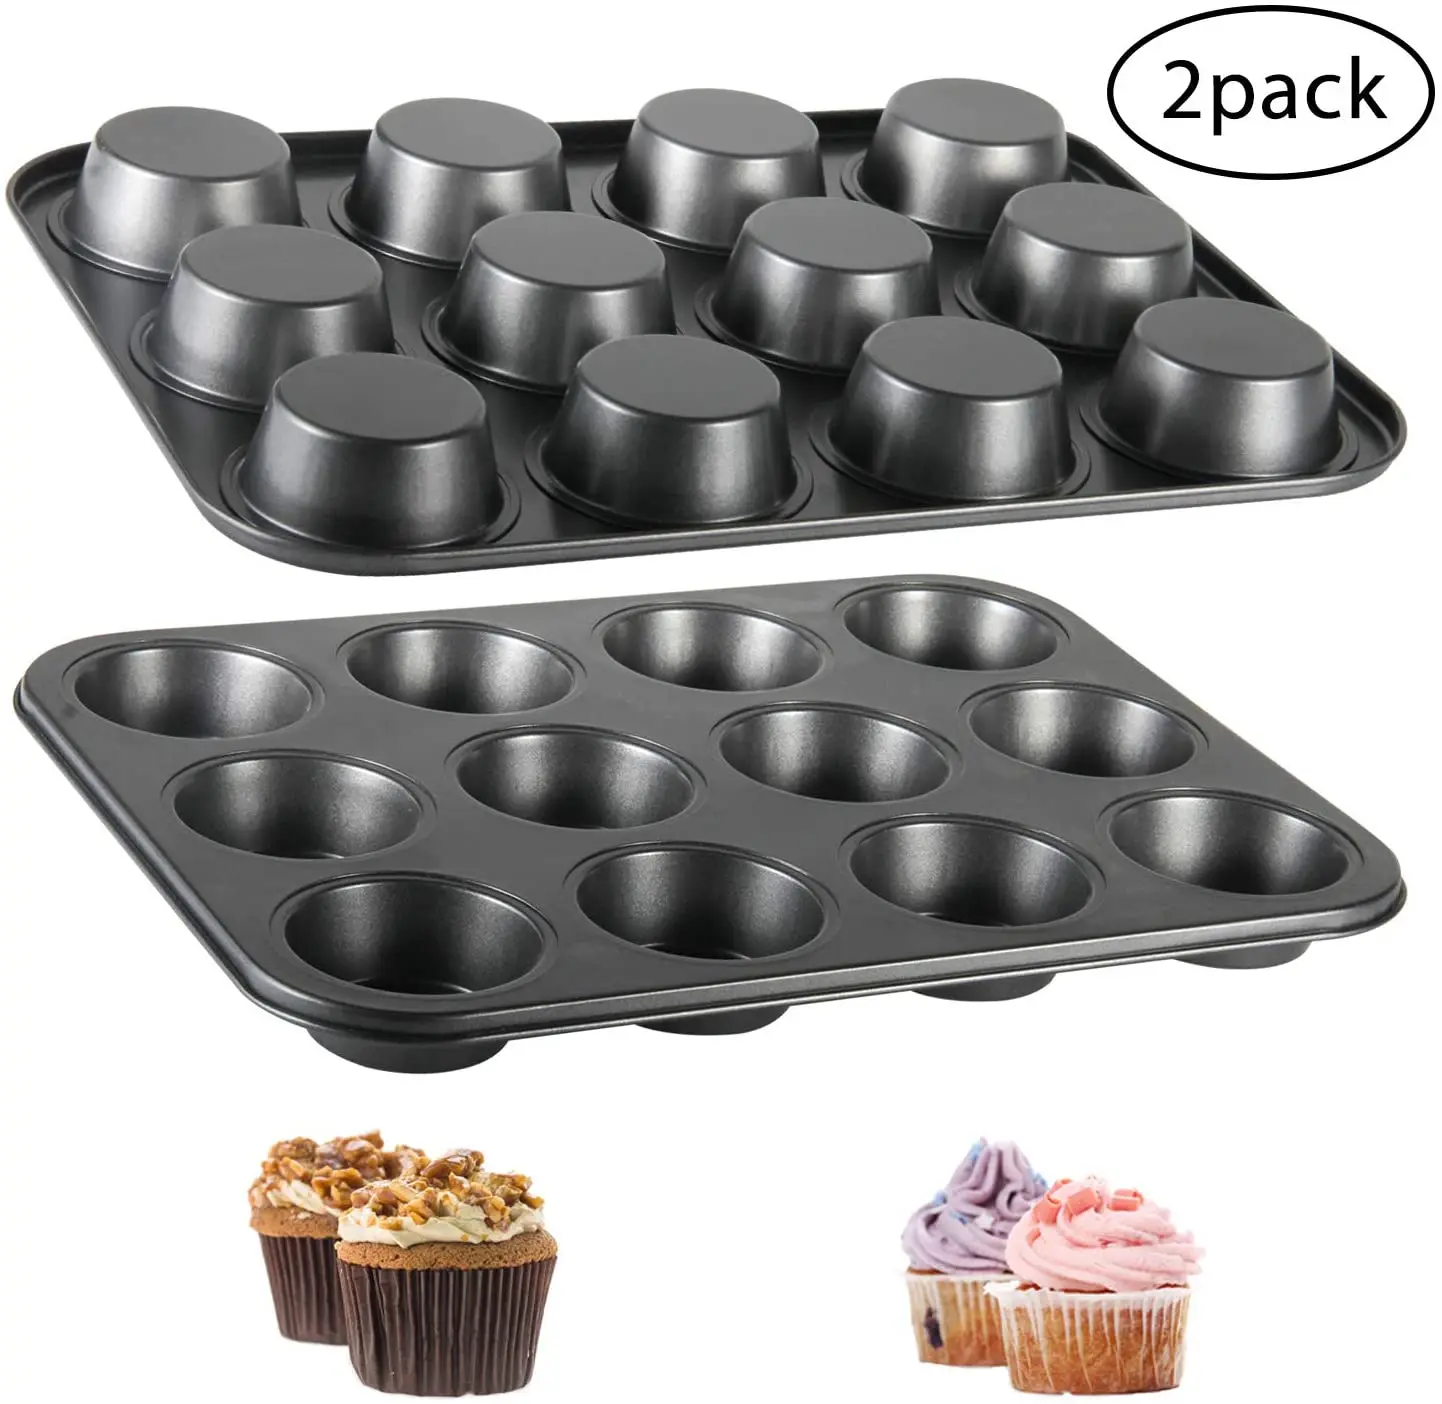 

Home Kitchen Golden Black Carbon Steel Nonstick 12 Cups Muffin Pan for Cupcake Baking Pans Bakeware Cake Mold